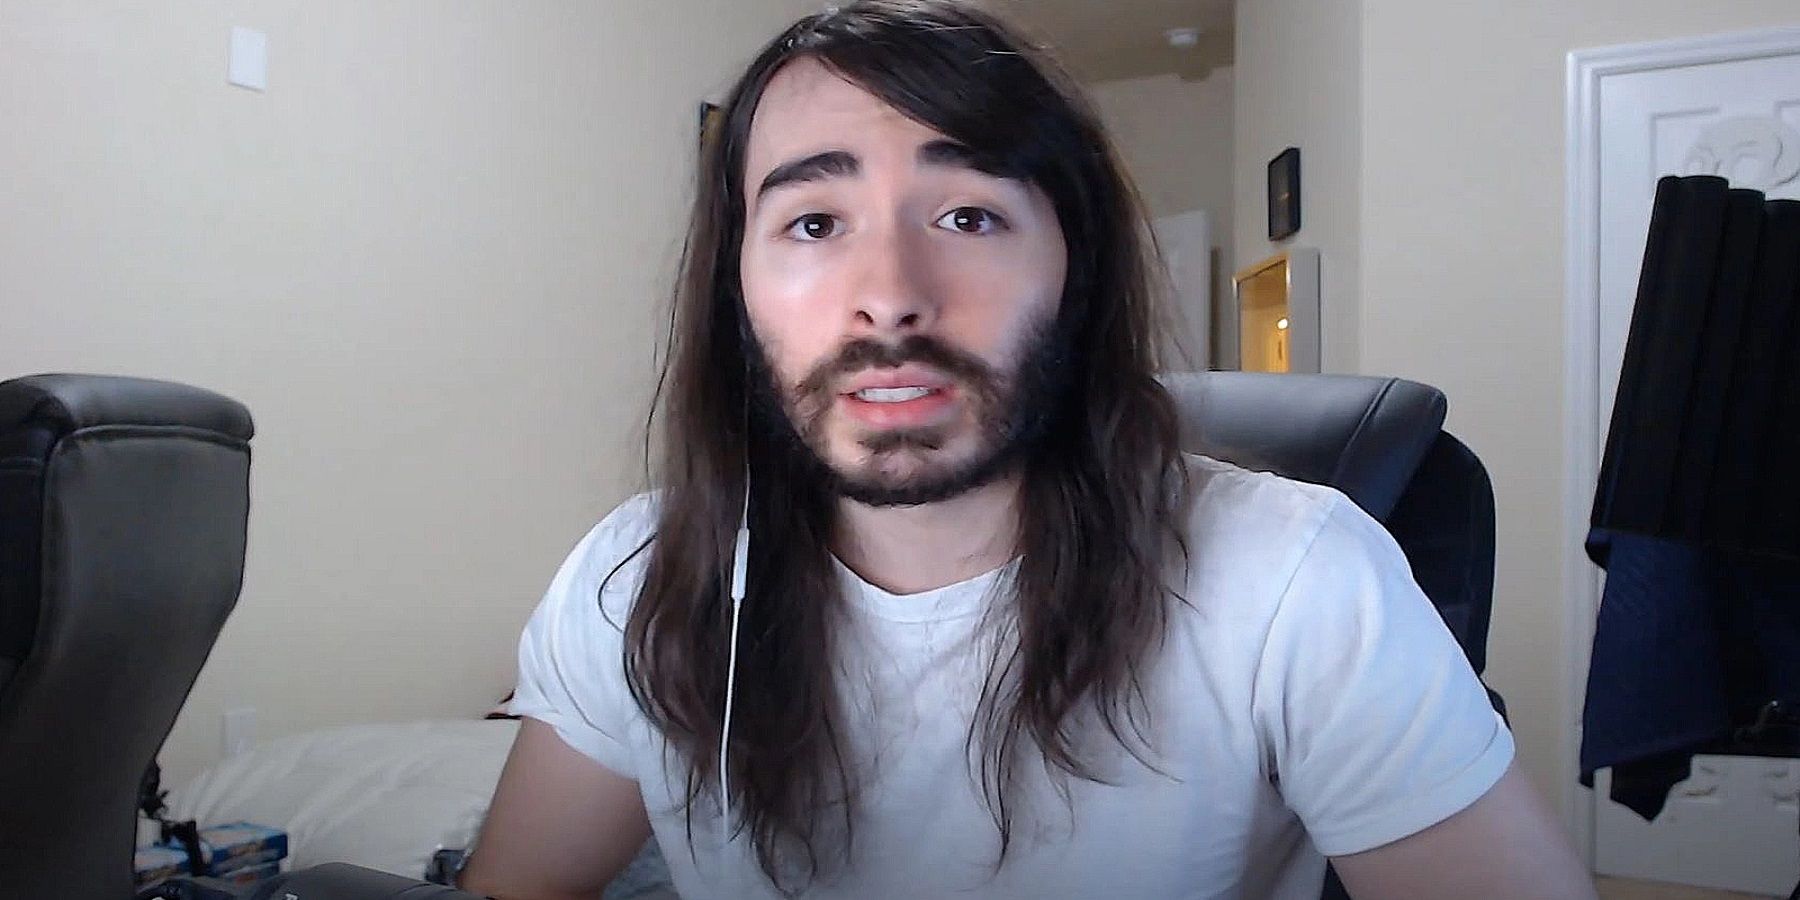 MoistCr1TiKal was fairly blunt in his criticism of Mizkif's apology amidst his multiple controversies.